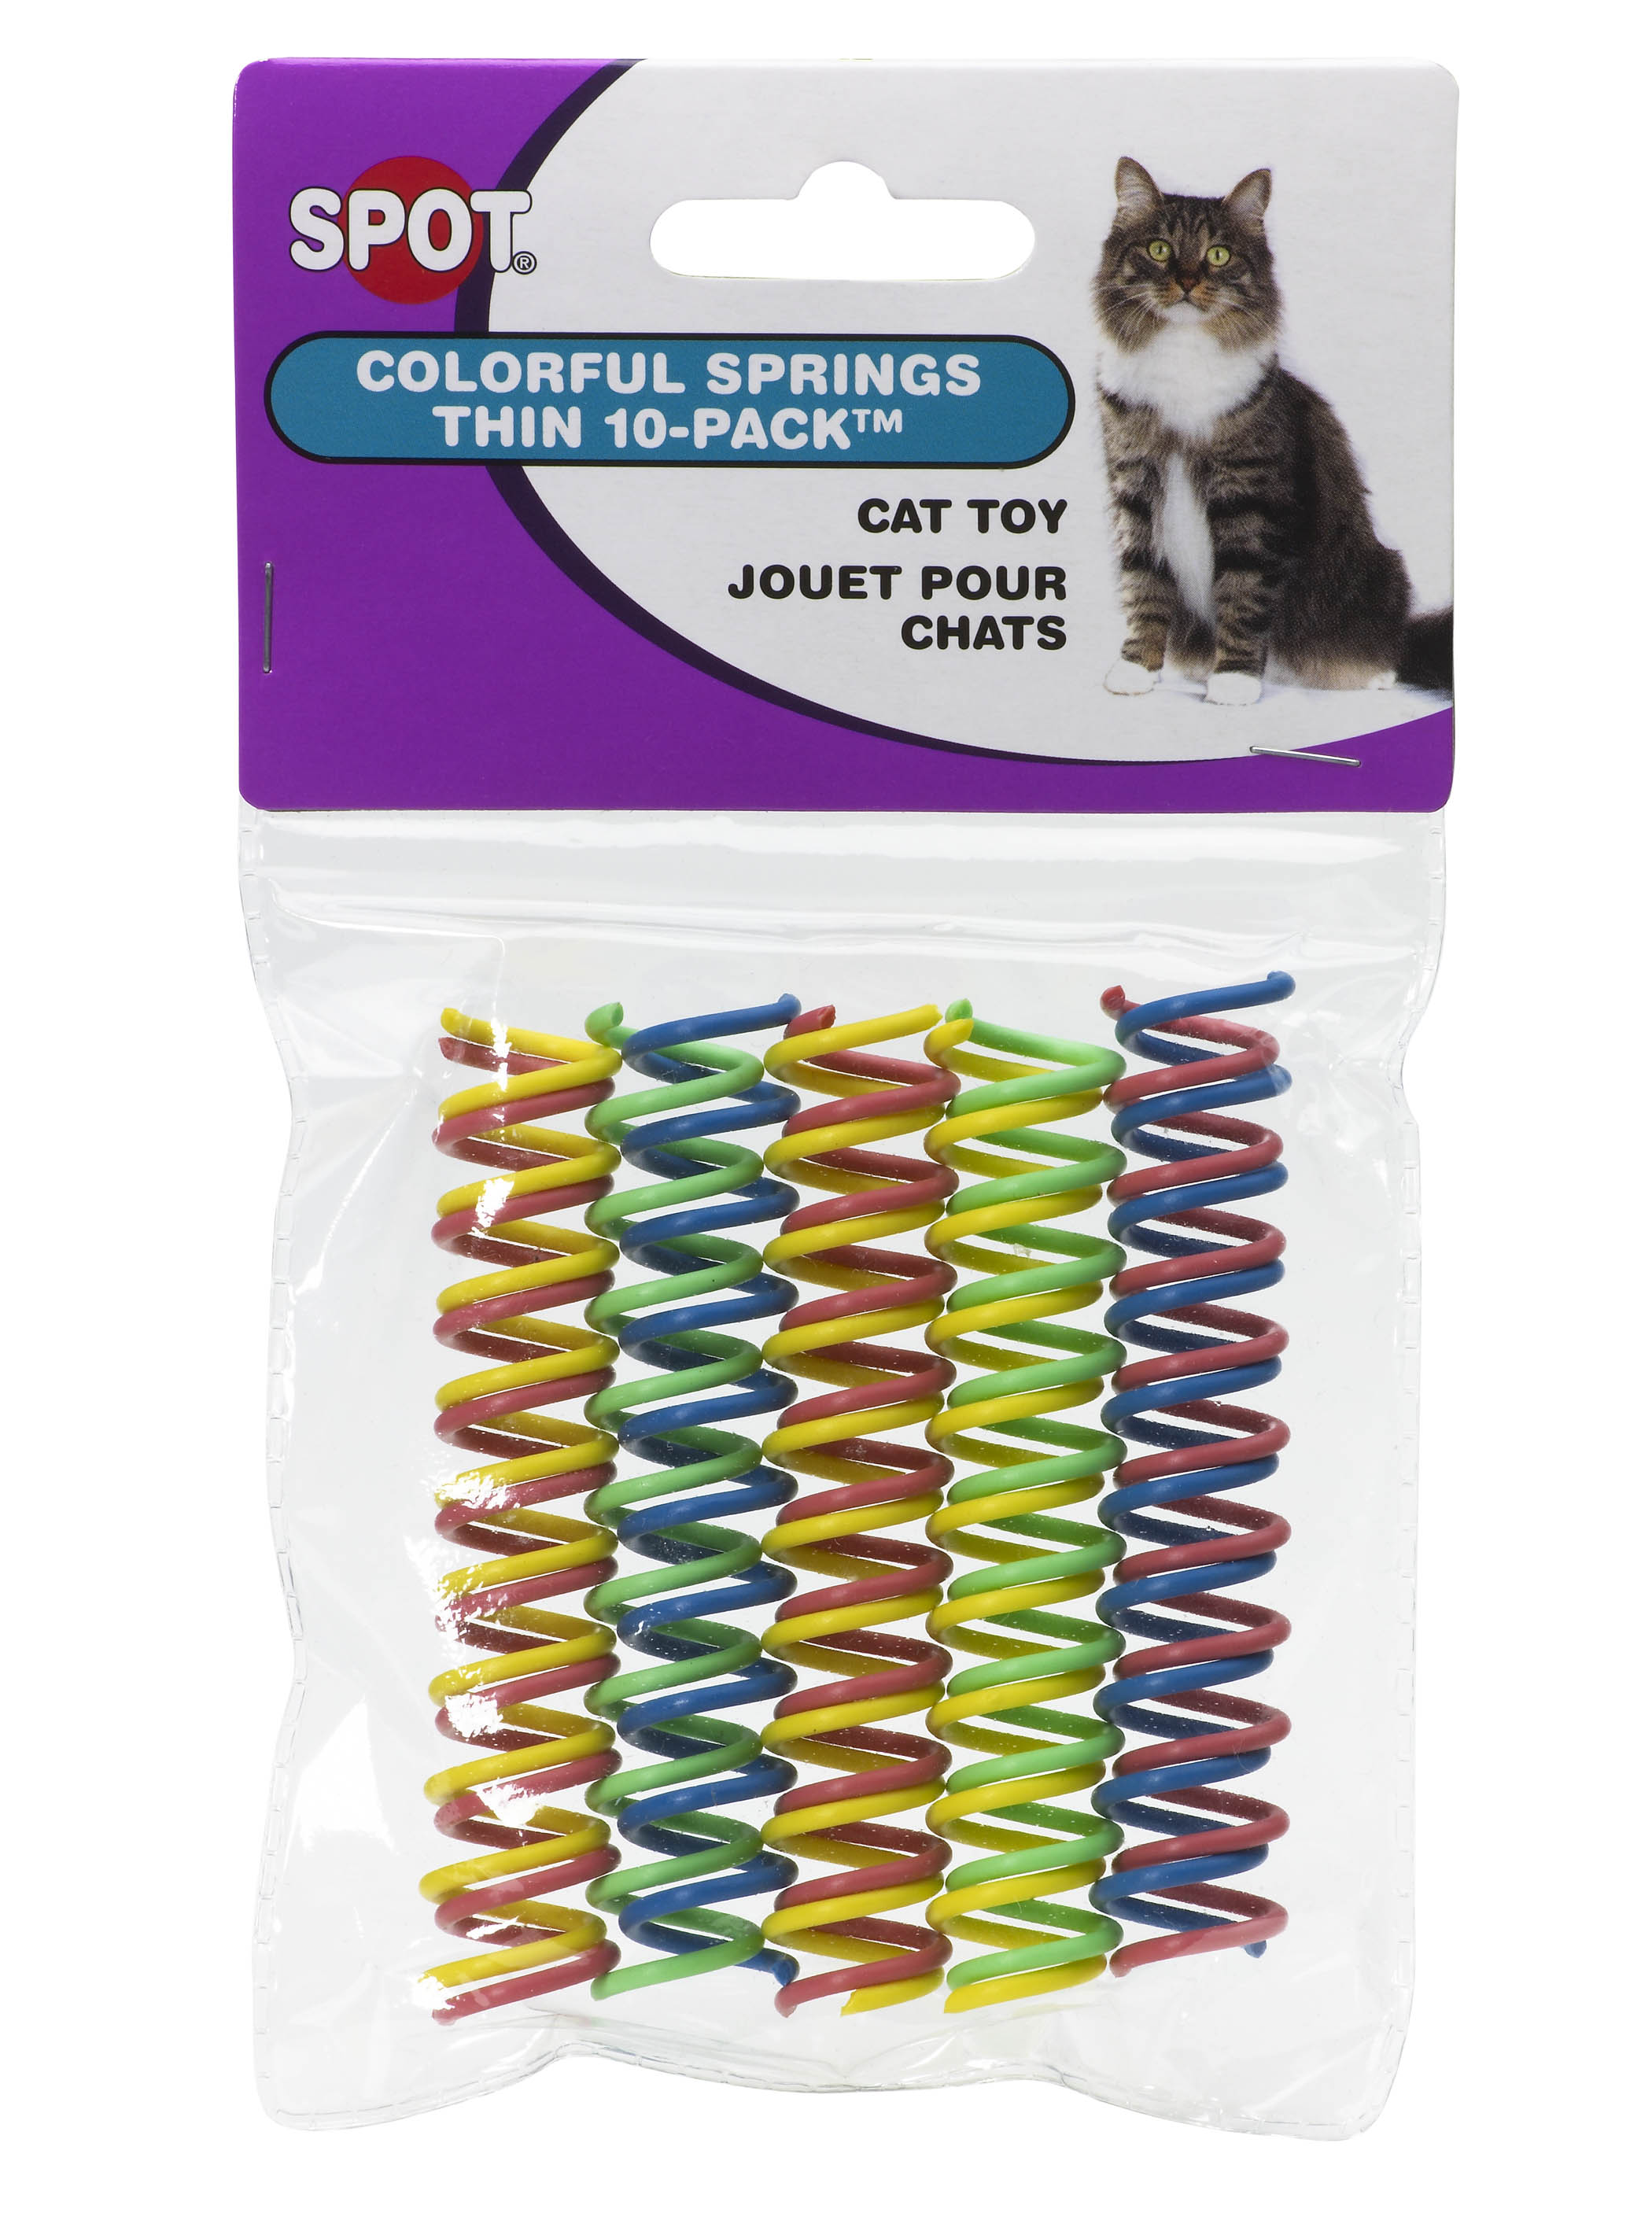 Ethical Colorful Spings Thin 10pack